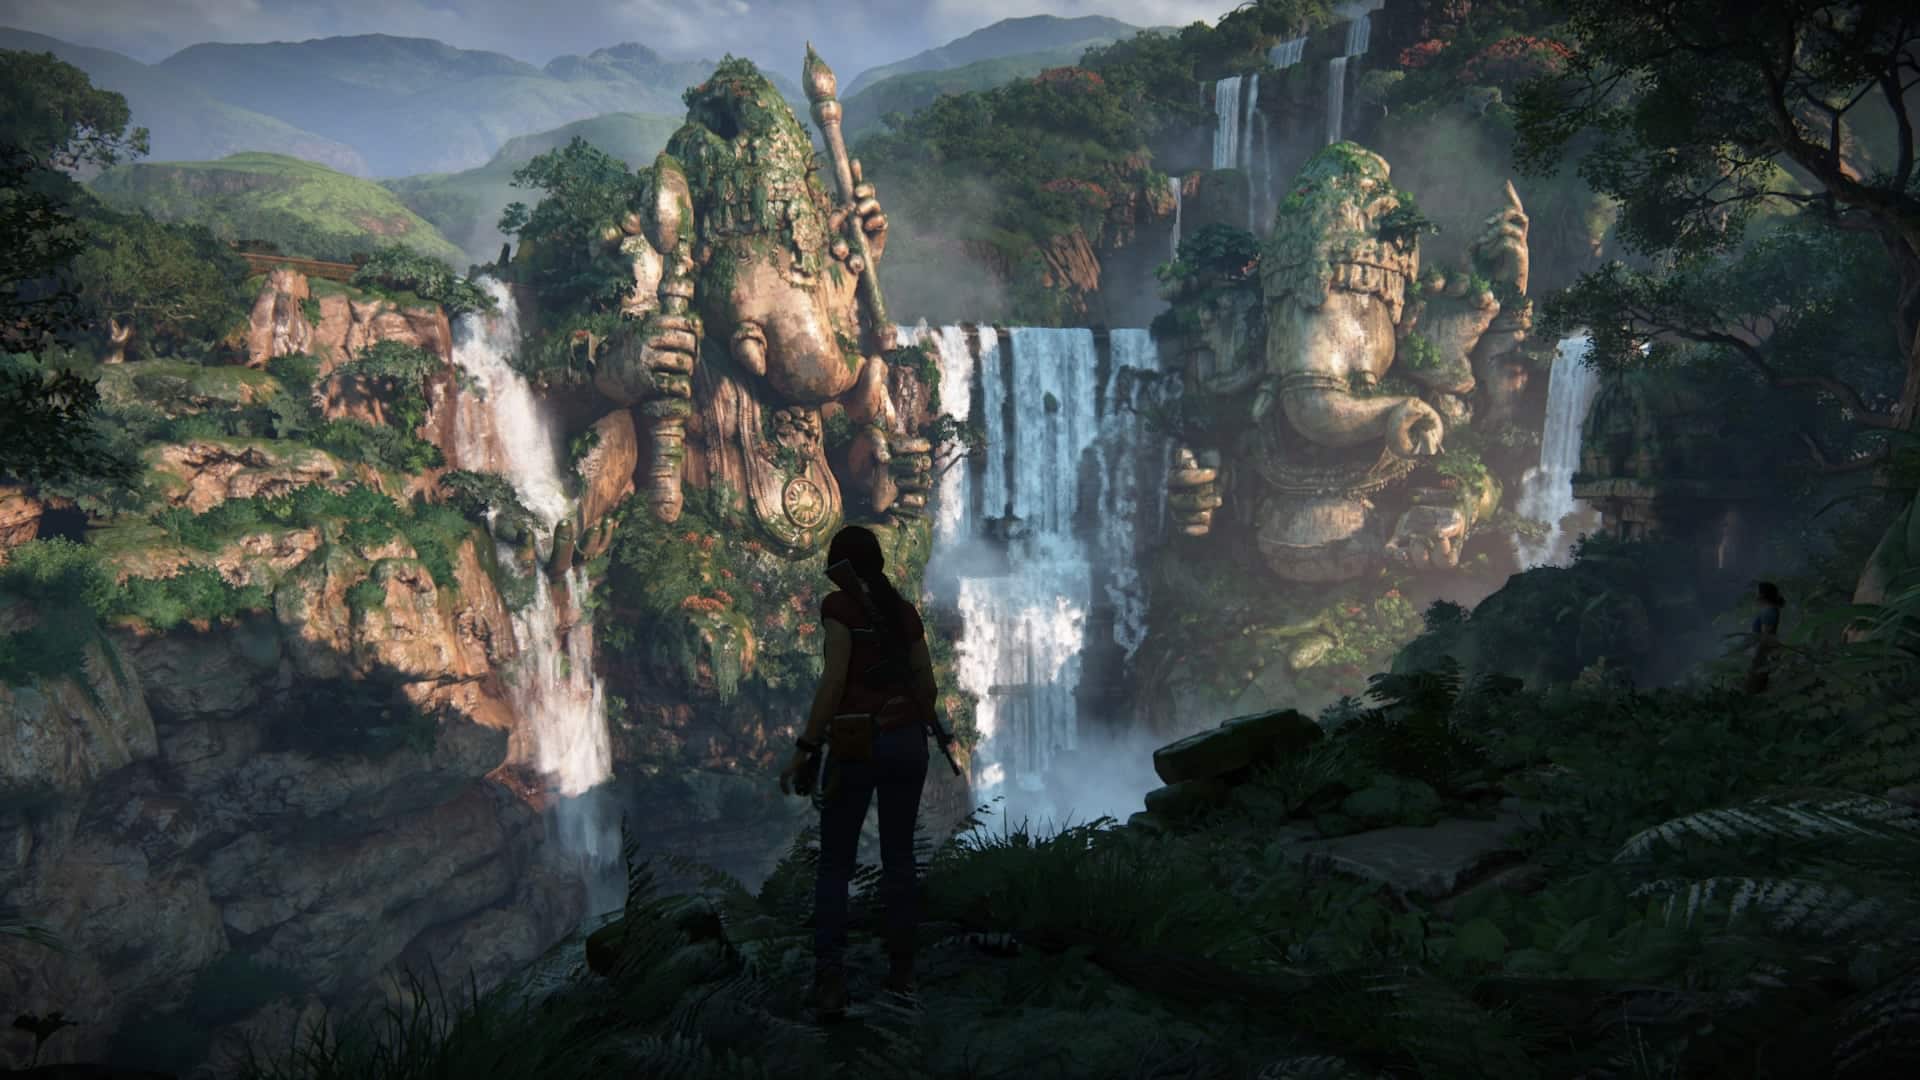 The architecture in Lost Legacy is amazing!